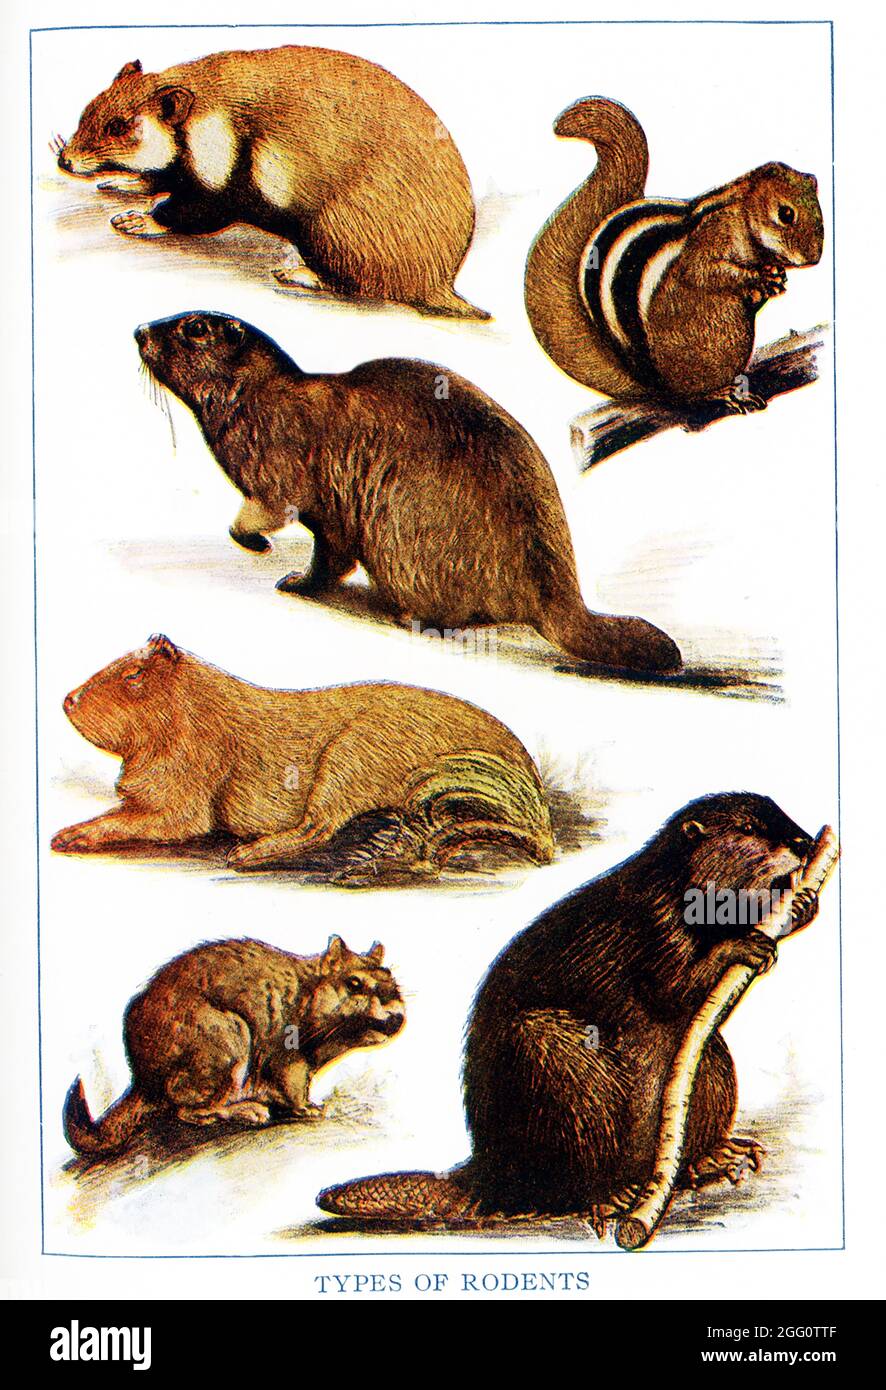 Shown here are various types of rodents. From left to right, top to bottom, they are:  European hamster, East Indian Striped squirrel, Woodchuck, Marmot,  South American Capybara, South american Vizcacha, Beaver Stock Photo